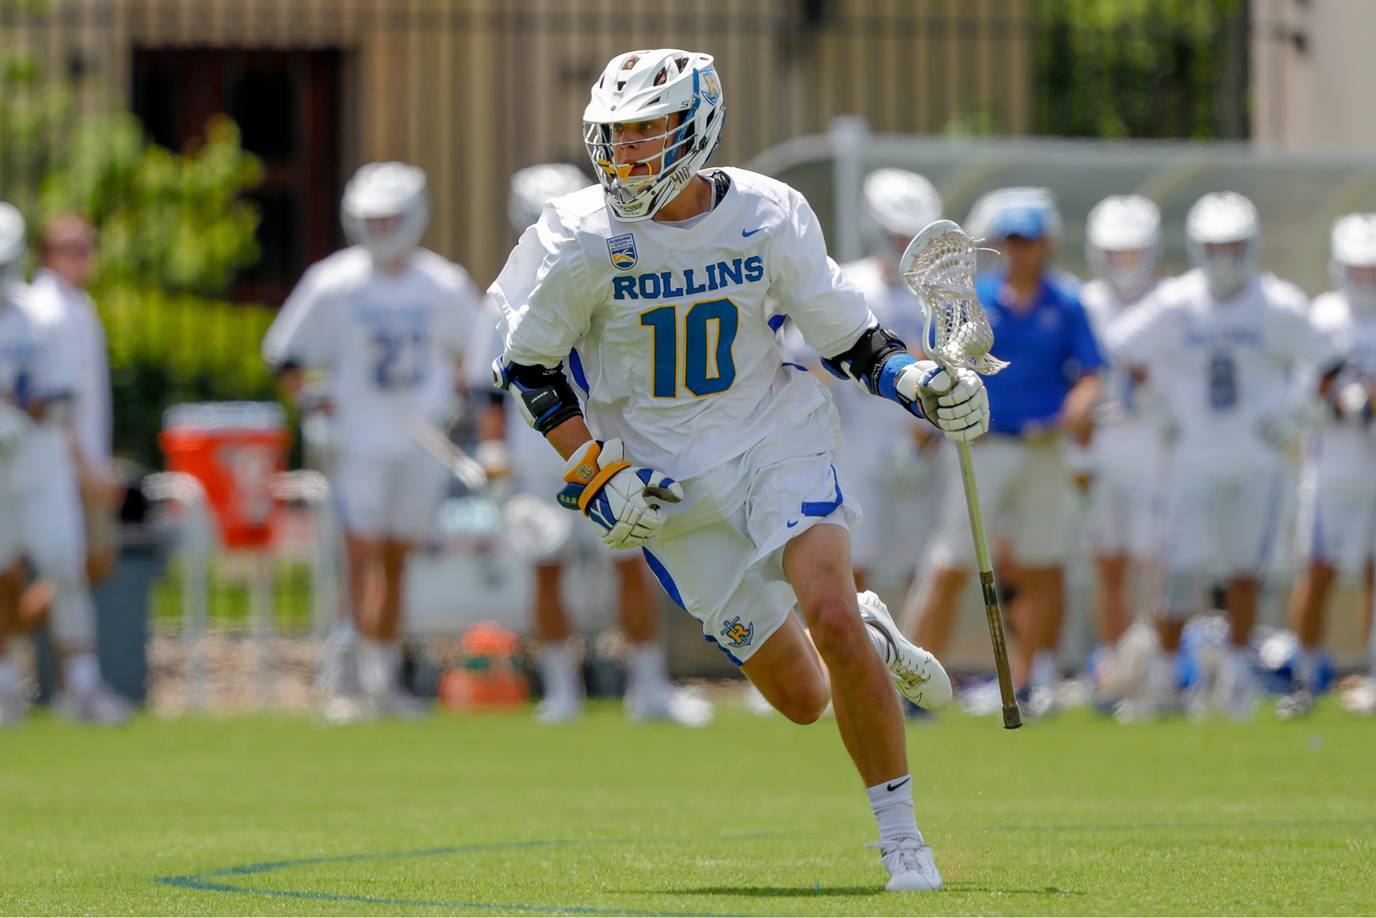 Greg Taicher fully dressed in his Rollins Lacrosse uniform running on the field.